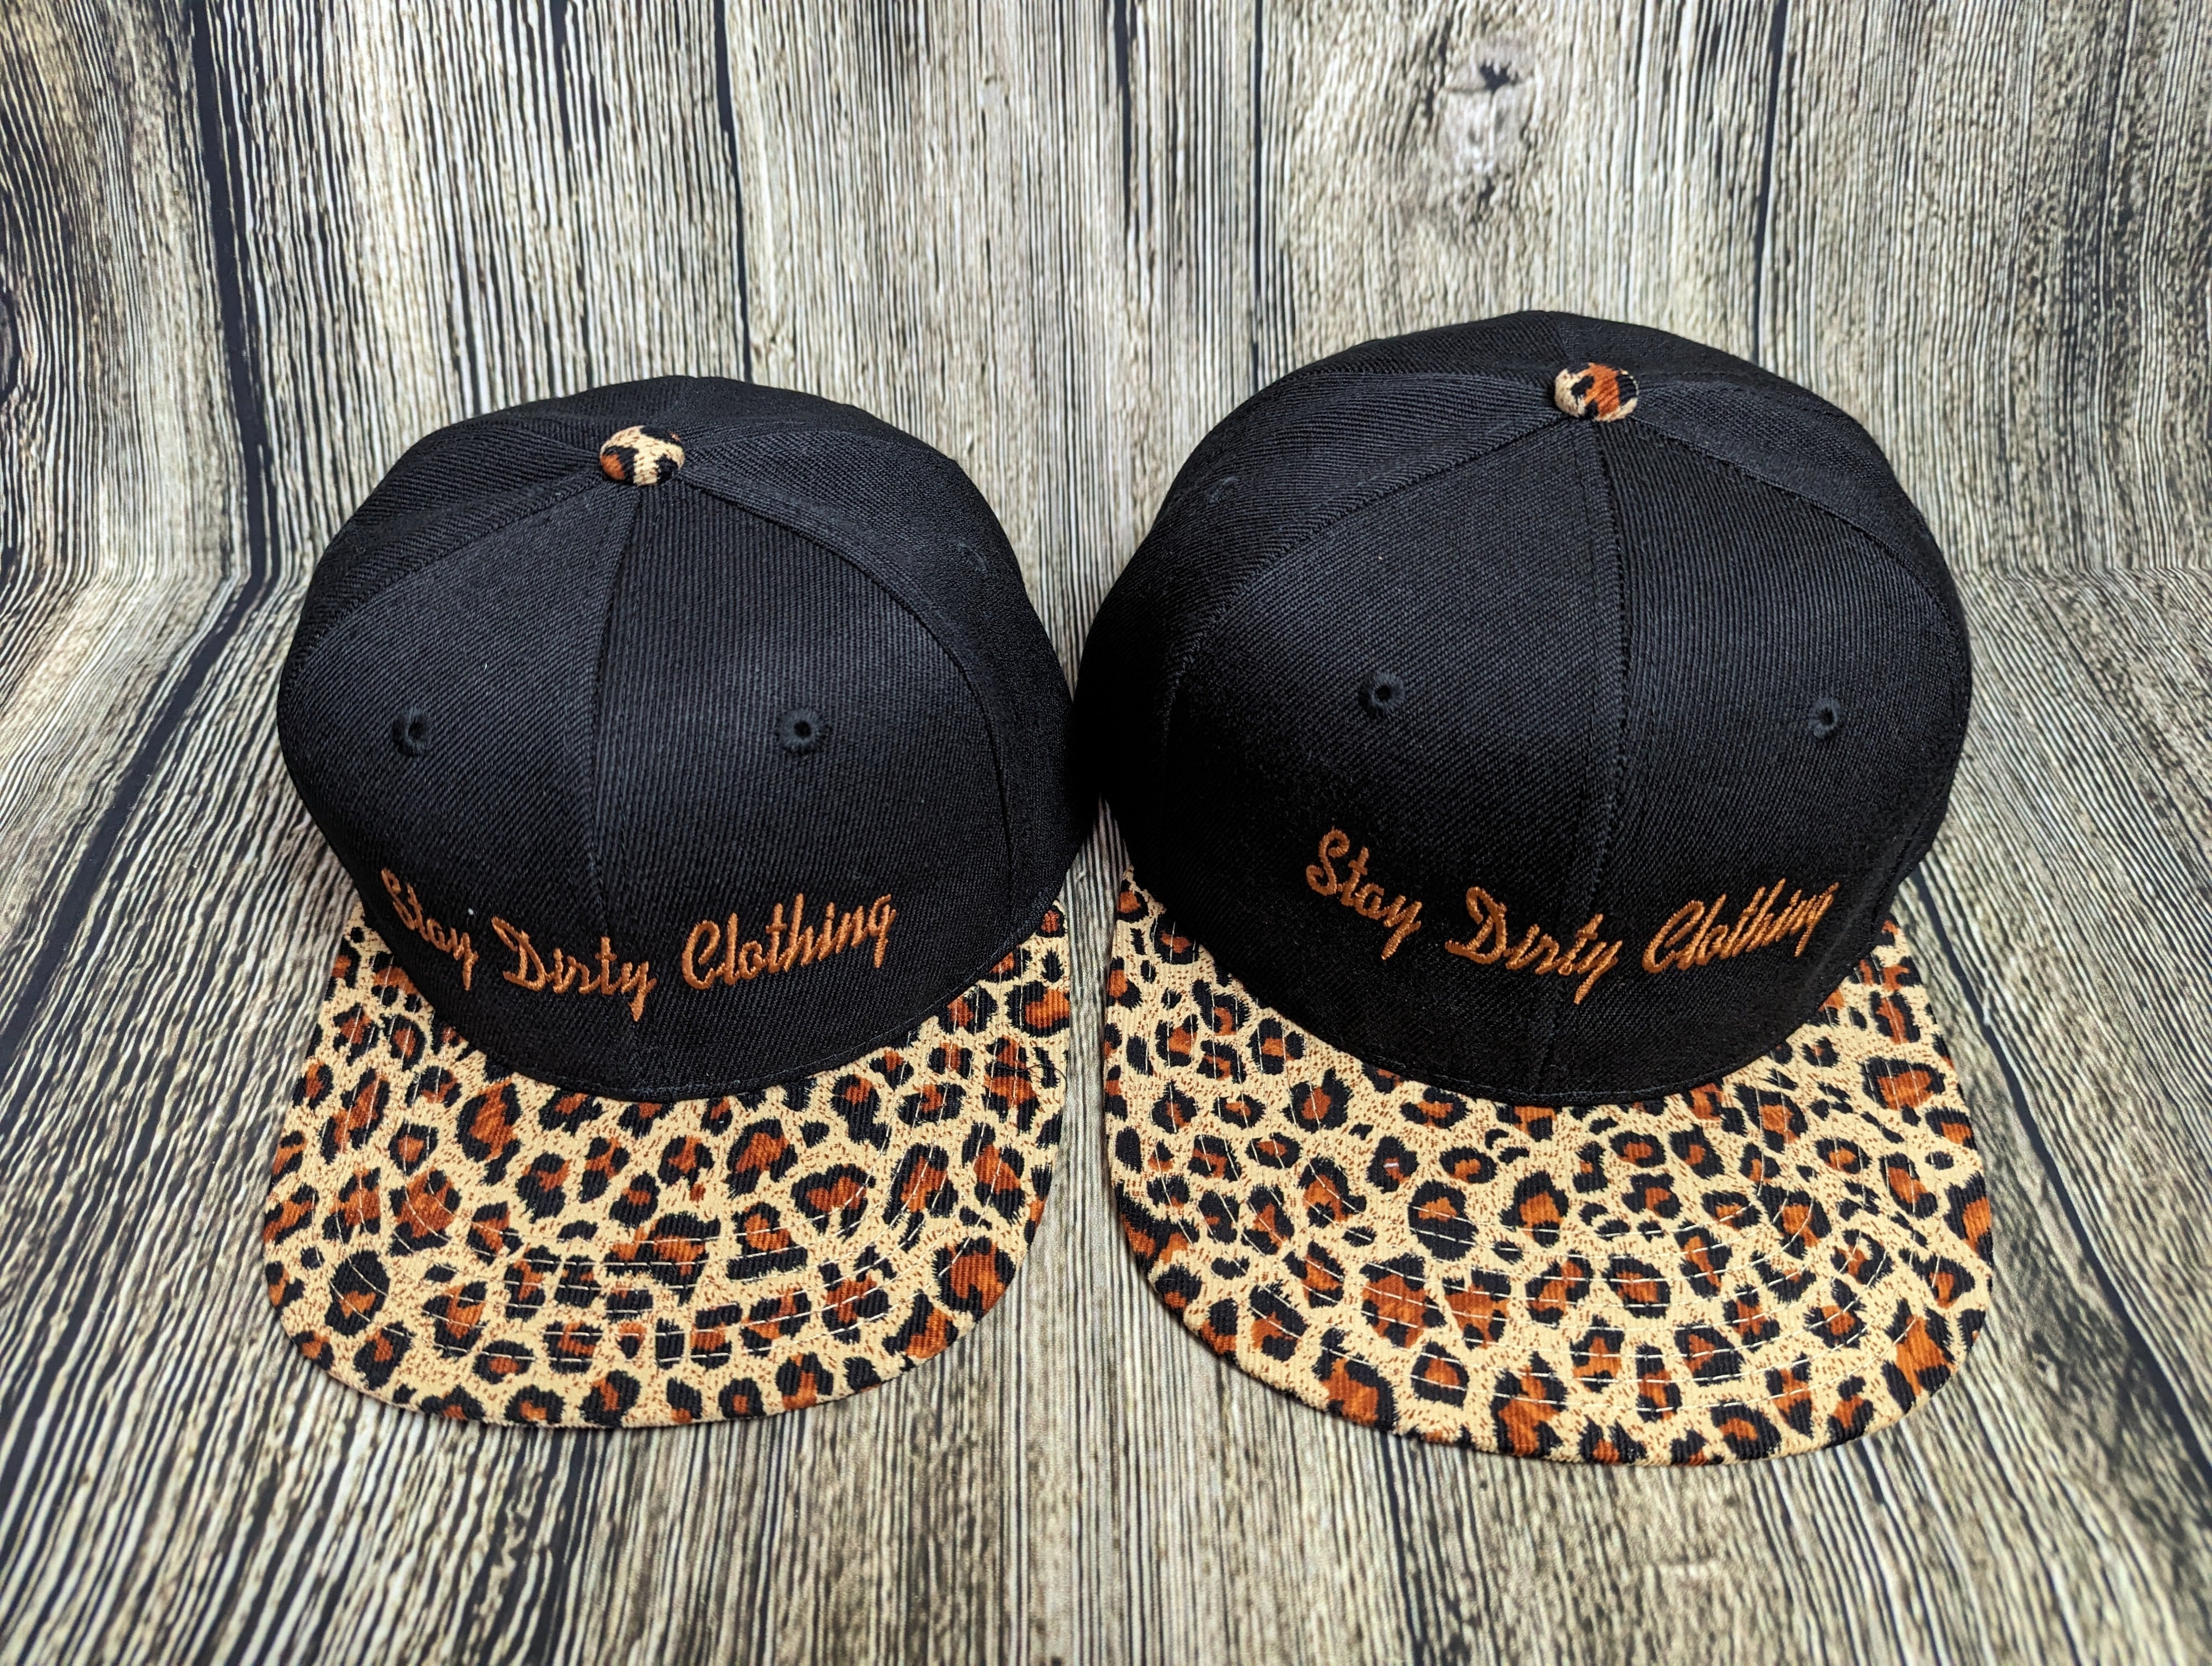 Stay Dirty Clothing  - Leopard Print Snapback Hat